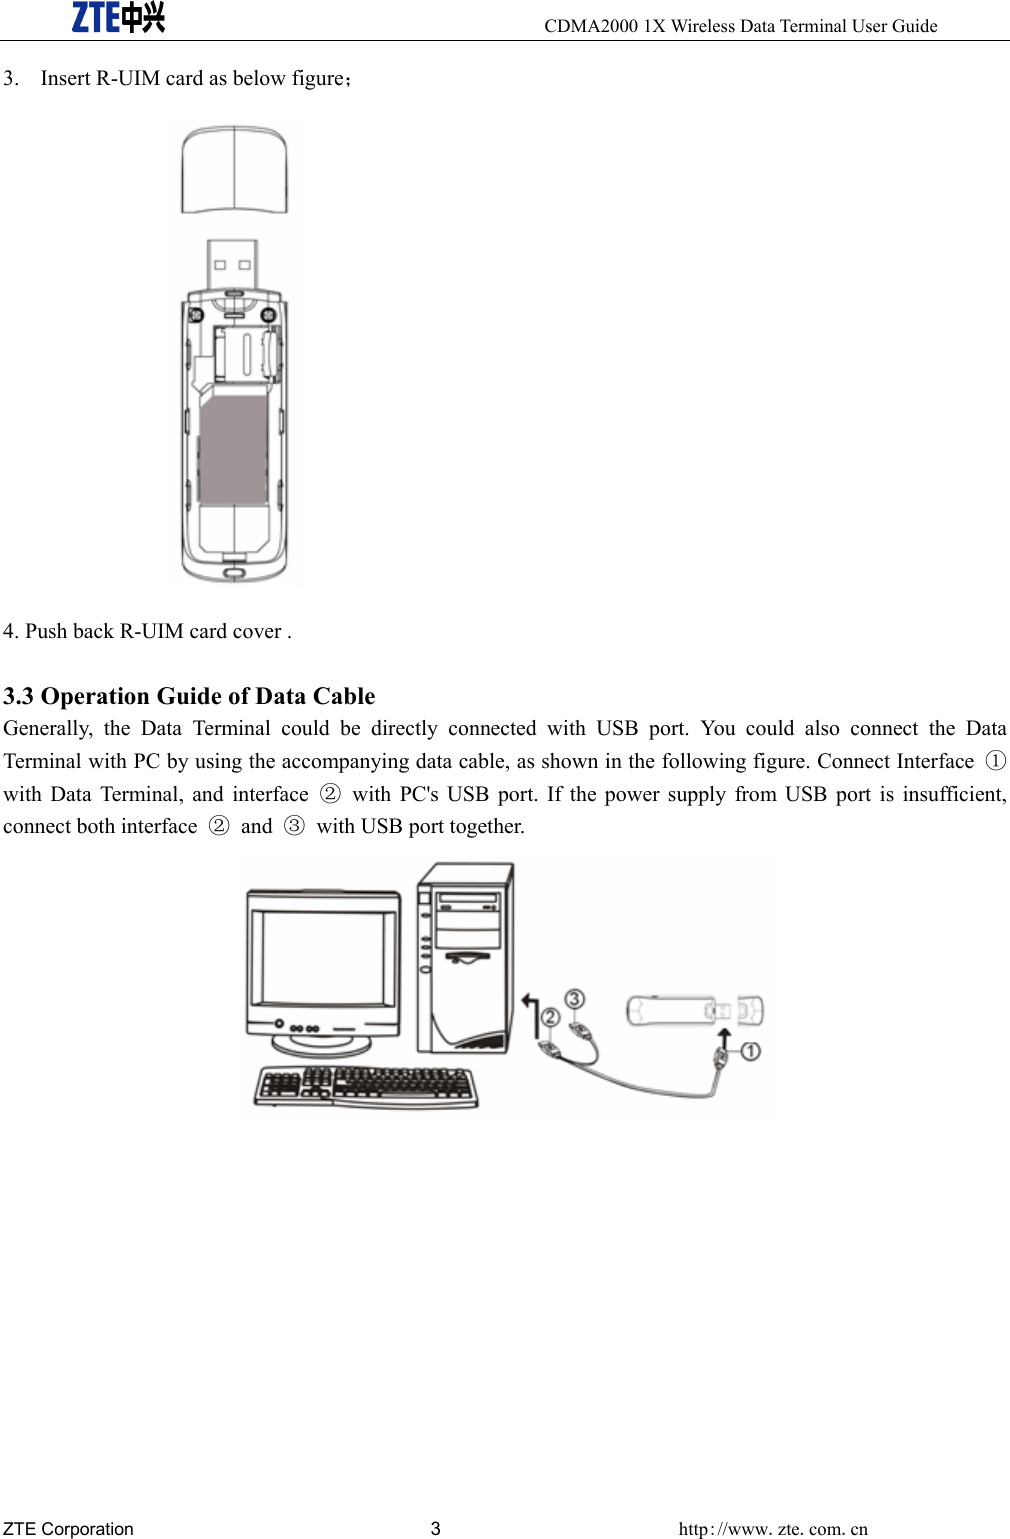     CDMA2000 1X Wireless Data Terminal User Guide ZTE Corporation 3 http://www.zte.com.cn  3. Insert R-UIM card as below figure；  4. Push back R-UIM card cover .  3.3 Operation Guide of Data Cable Generally, the Data Terminal could be directly connected with USB port. You could also connect the Data Terminal with PC by using the accompanying data cable, as shown in the following figure. Connect Interface  ① with Data Terminal, and interface ②  with PC&apos;s USB port. If the power supply from USB port is insufficient, connect both interface  ② and ③  with USB port together.   